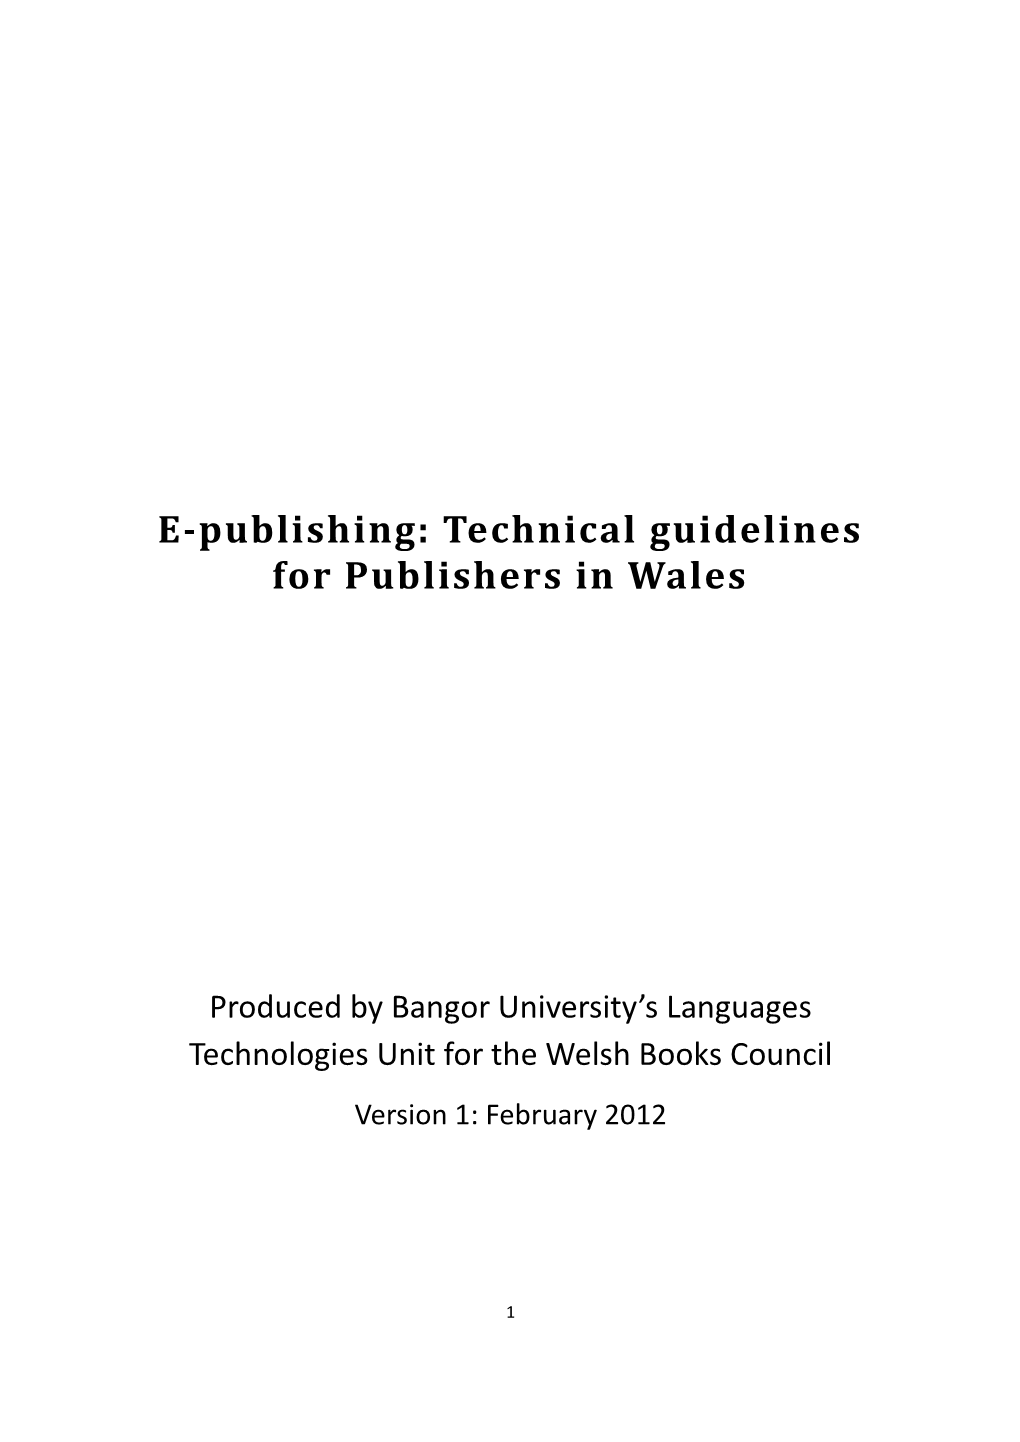 E-Publishing Technical Guidelines for Publishers